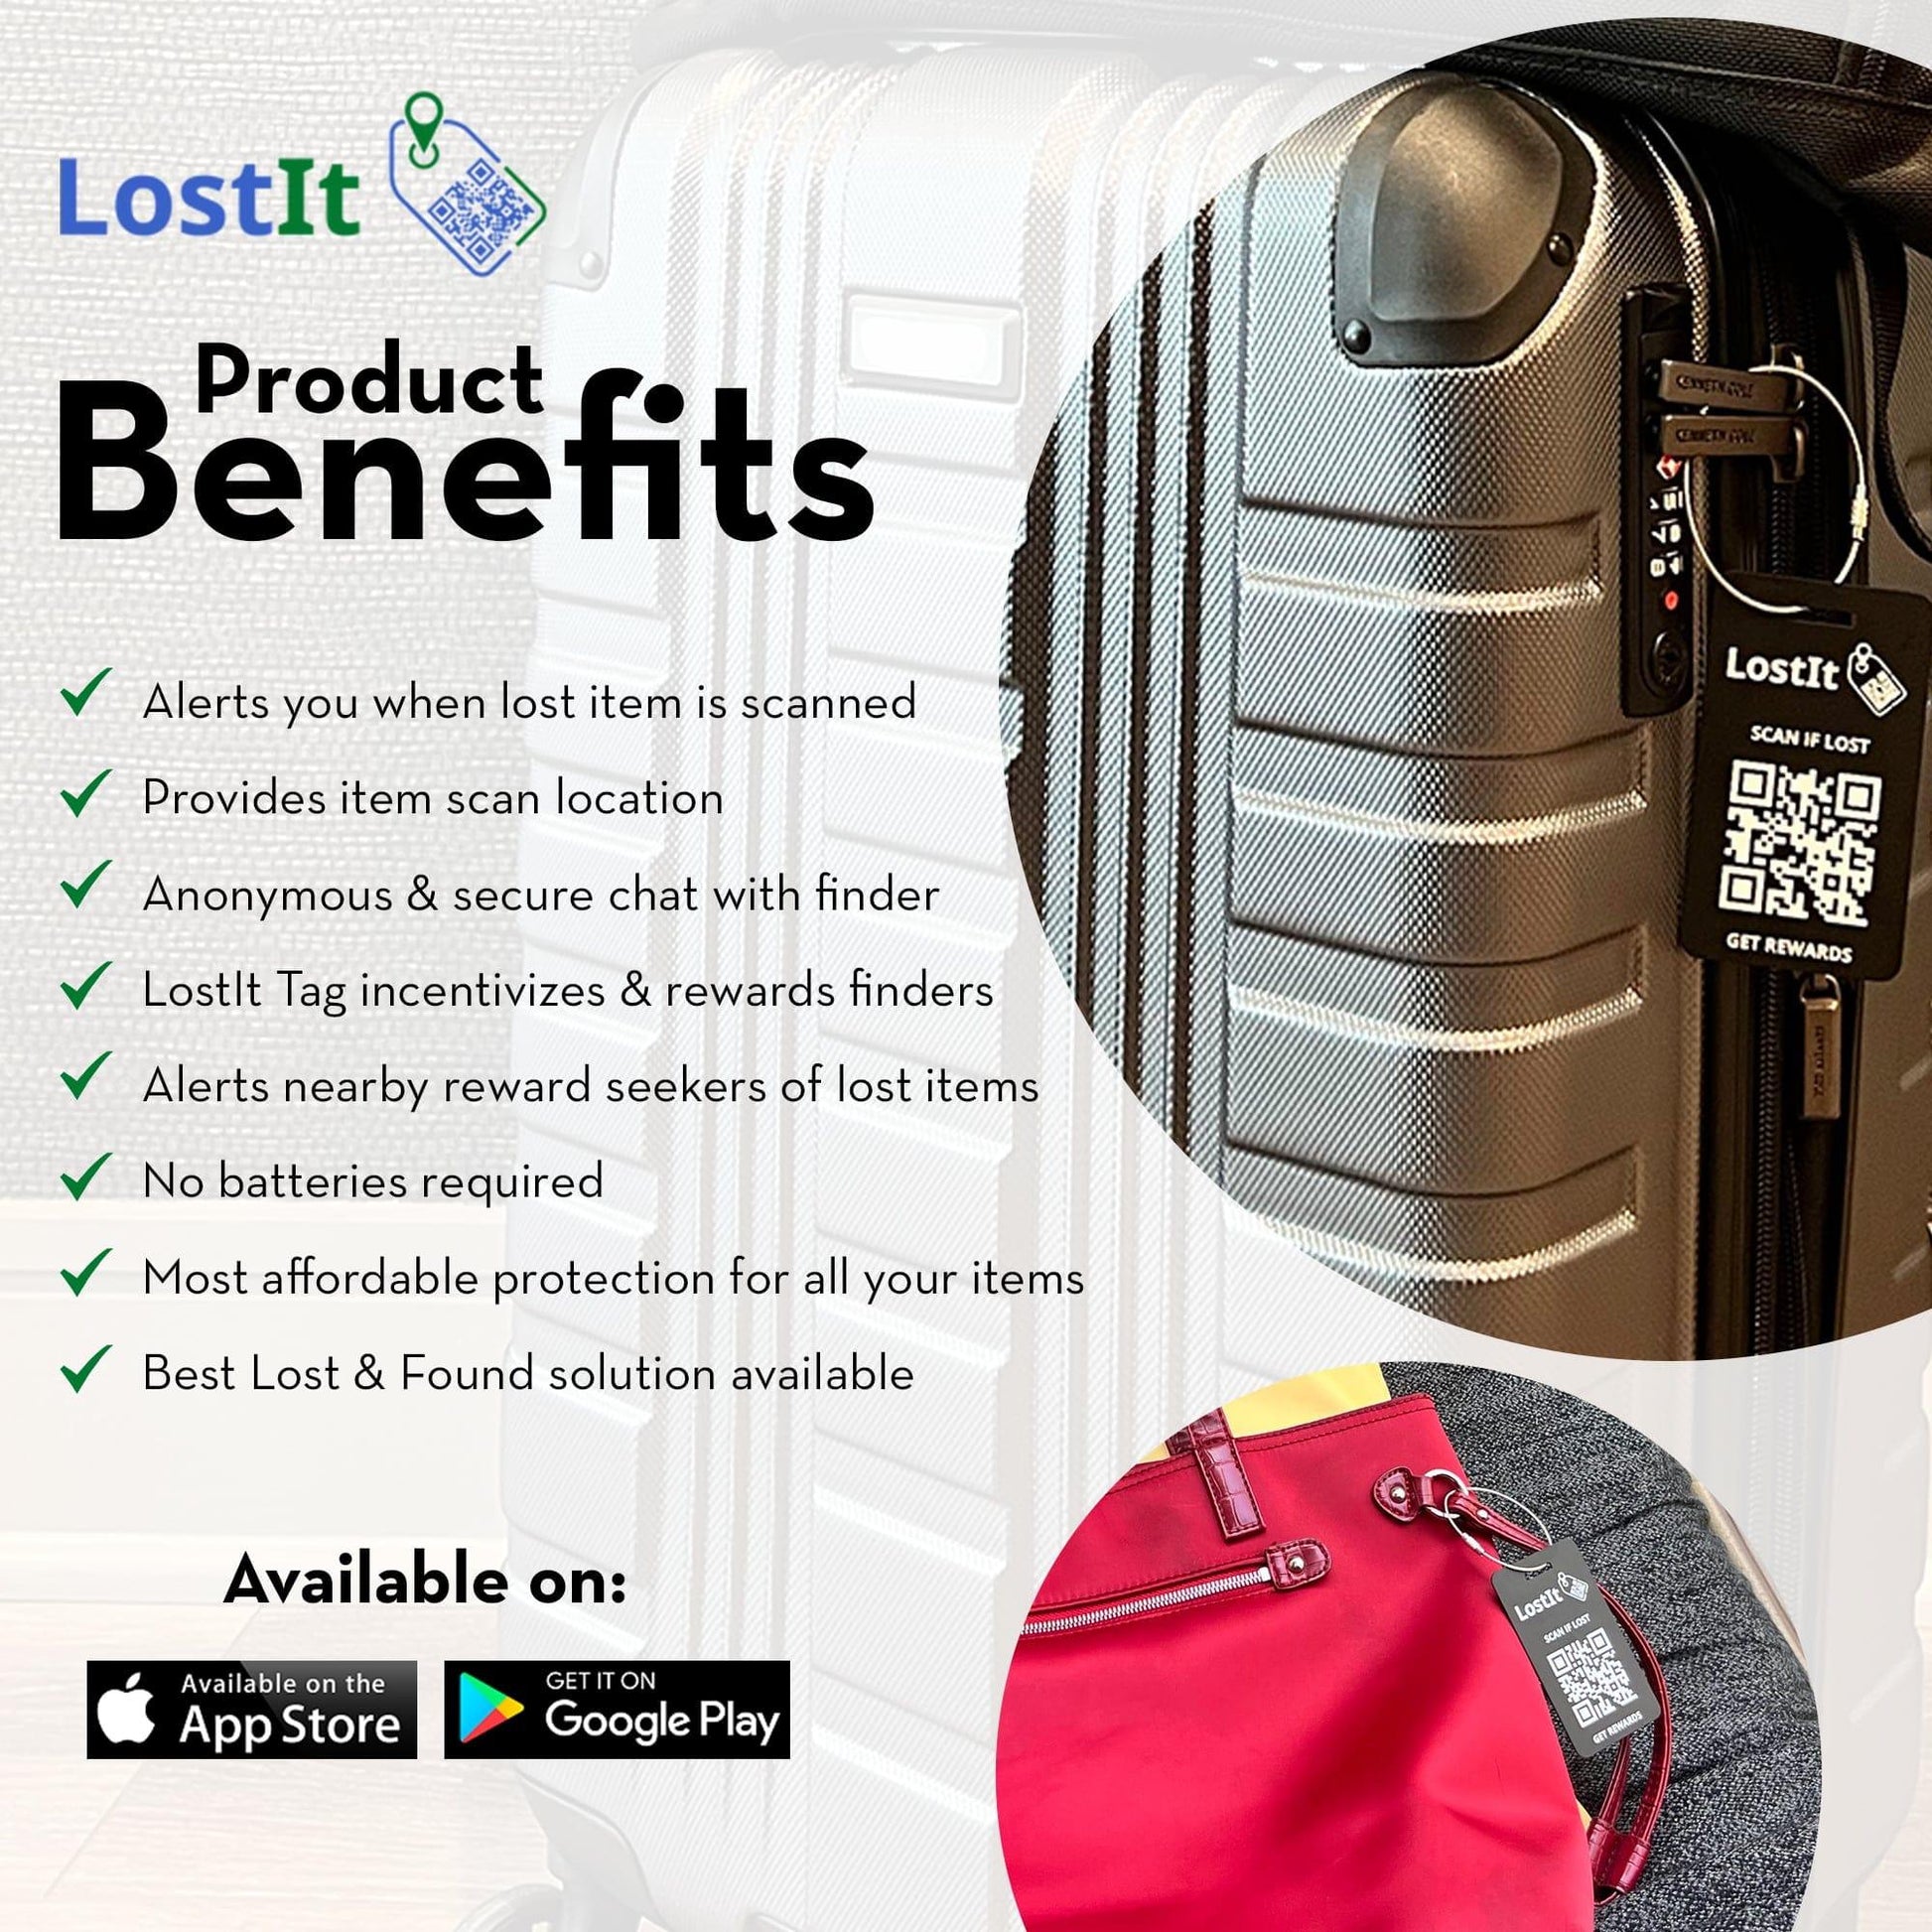 Product Benefits. Alerts you when a lost item is scanned. Provides item scan location. Anonymous and secure chat with finder. LostIt Tag incentivizes and rewards finders—alerts nearby reward seekers of lost items. No batteries are required. Most affordable protection for all your items. Best Lost and Found solution available. The app is available for download on the App and Play Store.